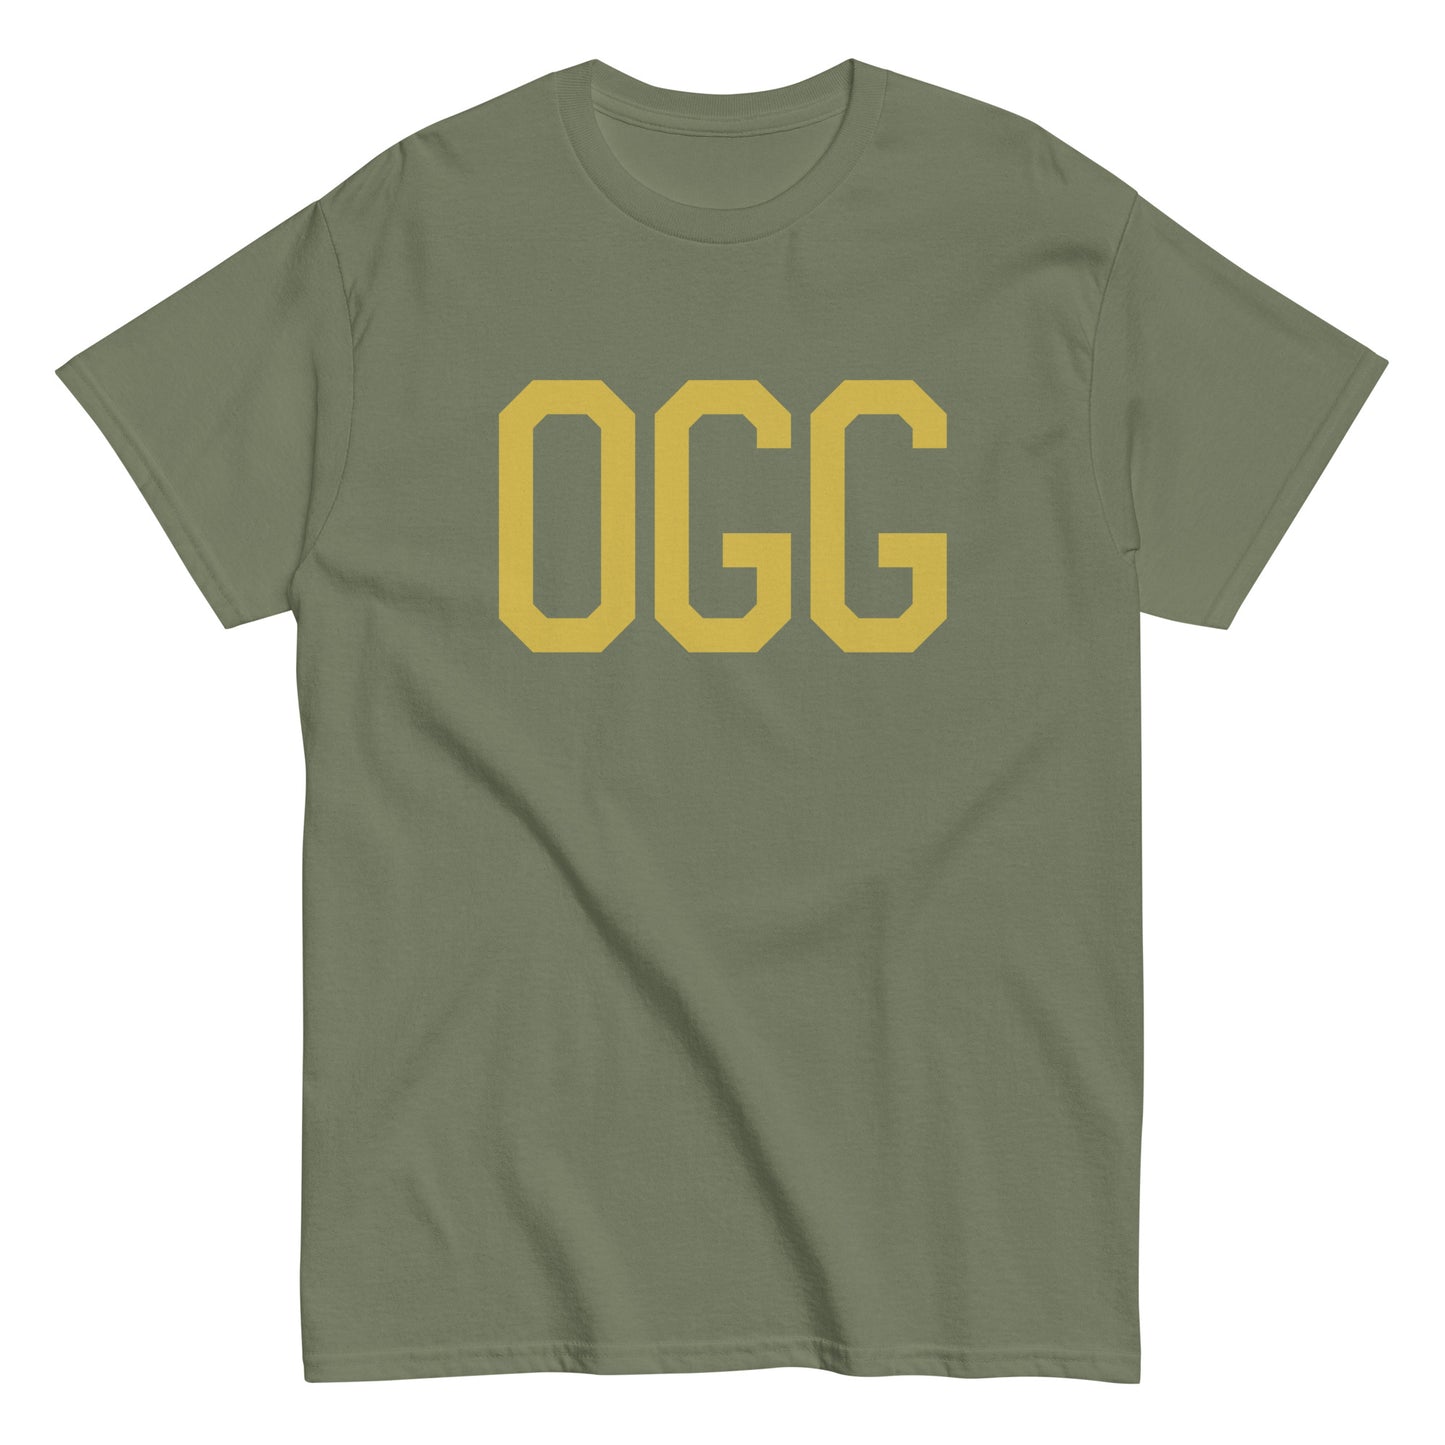 Aviation Enthusiast Men's Tee - Old Gold Graphic • OGG Maui • YHM Designs - Image 02